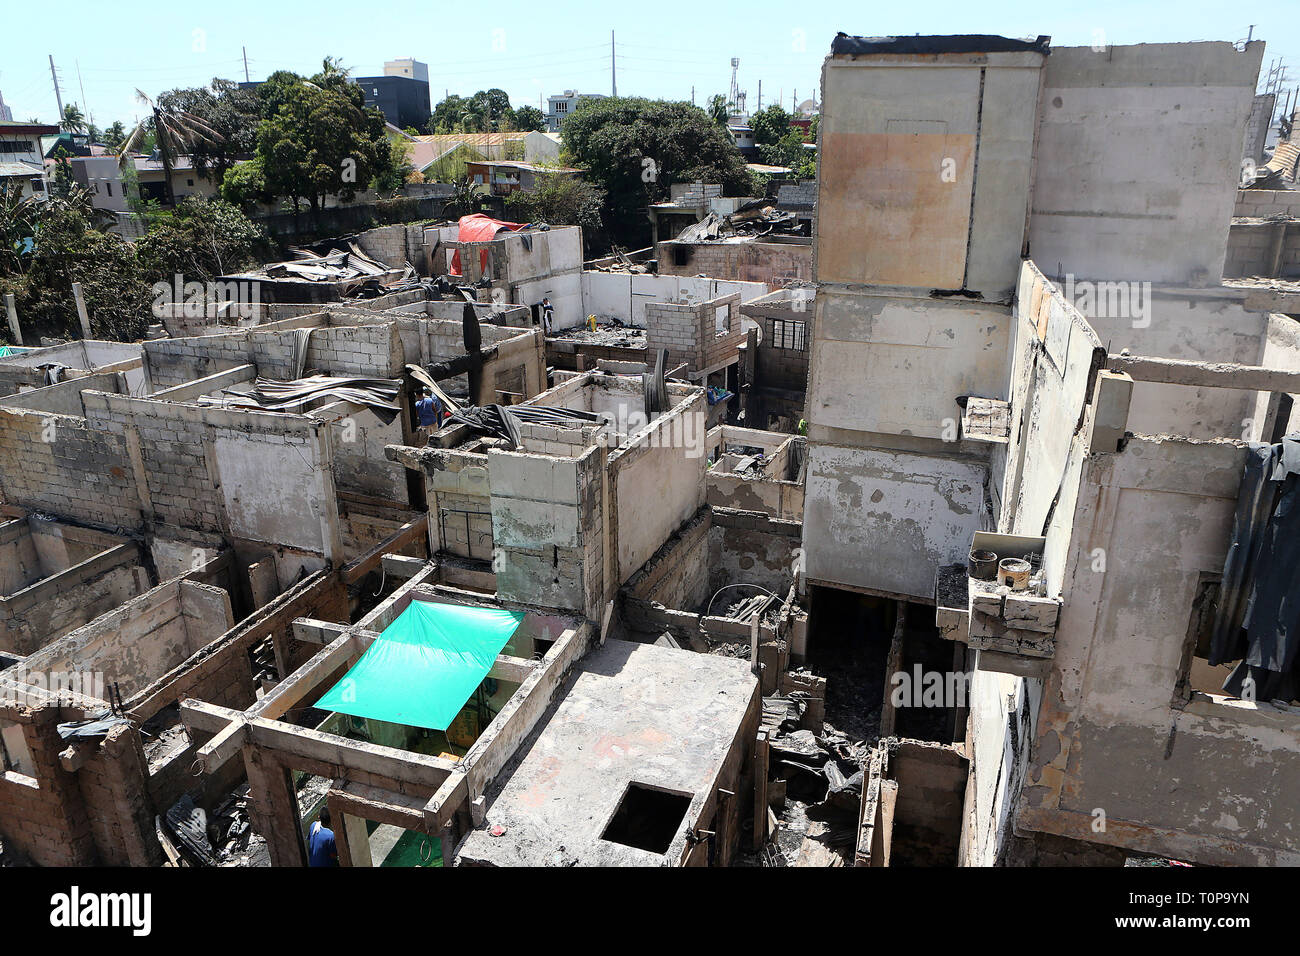 Quezon City, Philippines. 21st Mar, 2019. Charred concrete frames of homes are seen after a fire at a slum area in Quezon City, the Philippines, March 21, 2019. More than 250 shanties were razed in the fire, leaving 750 families homeless. Credit: Rouelle Umali/Xinhua/Alamy Live News Stock Photo